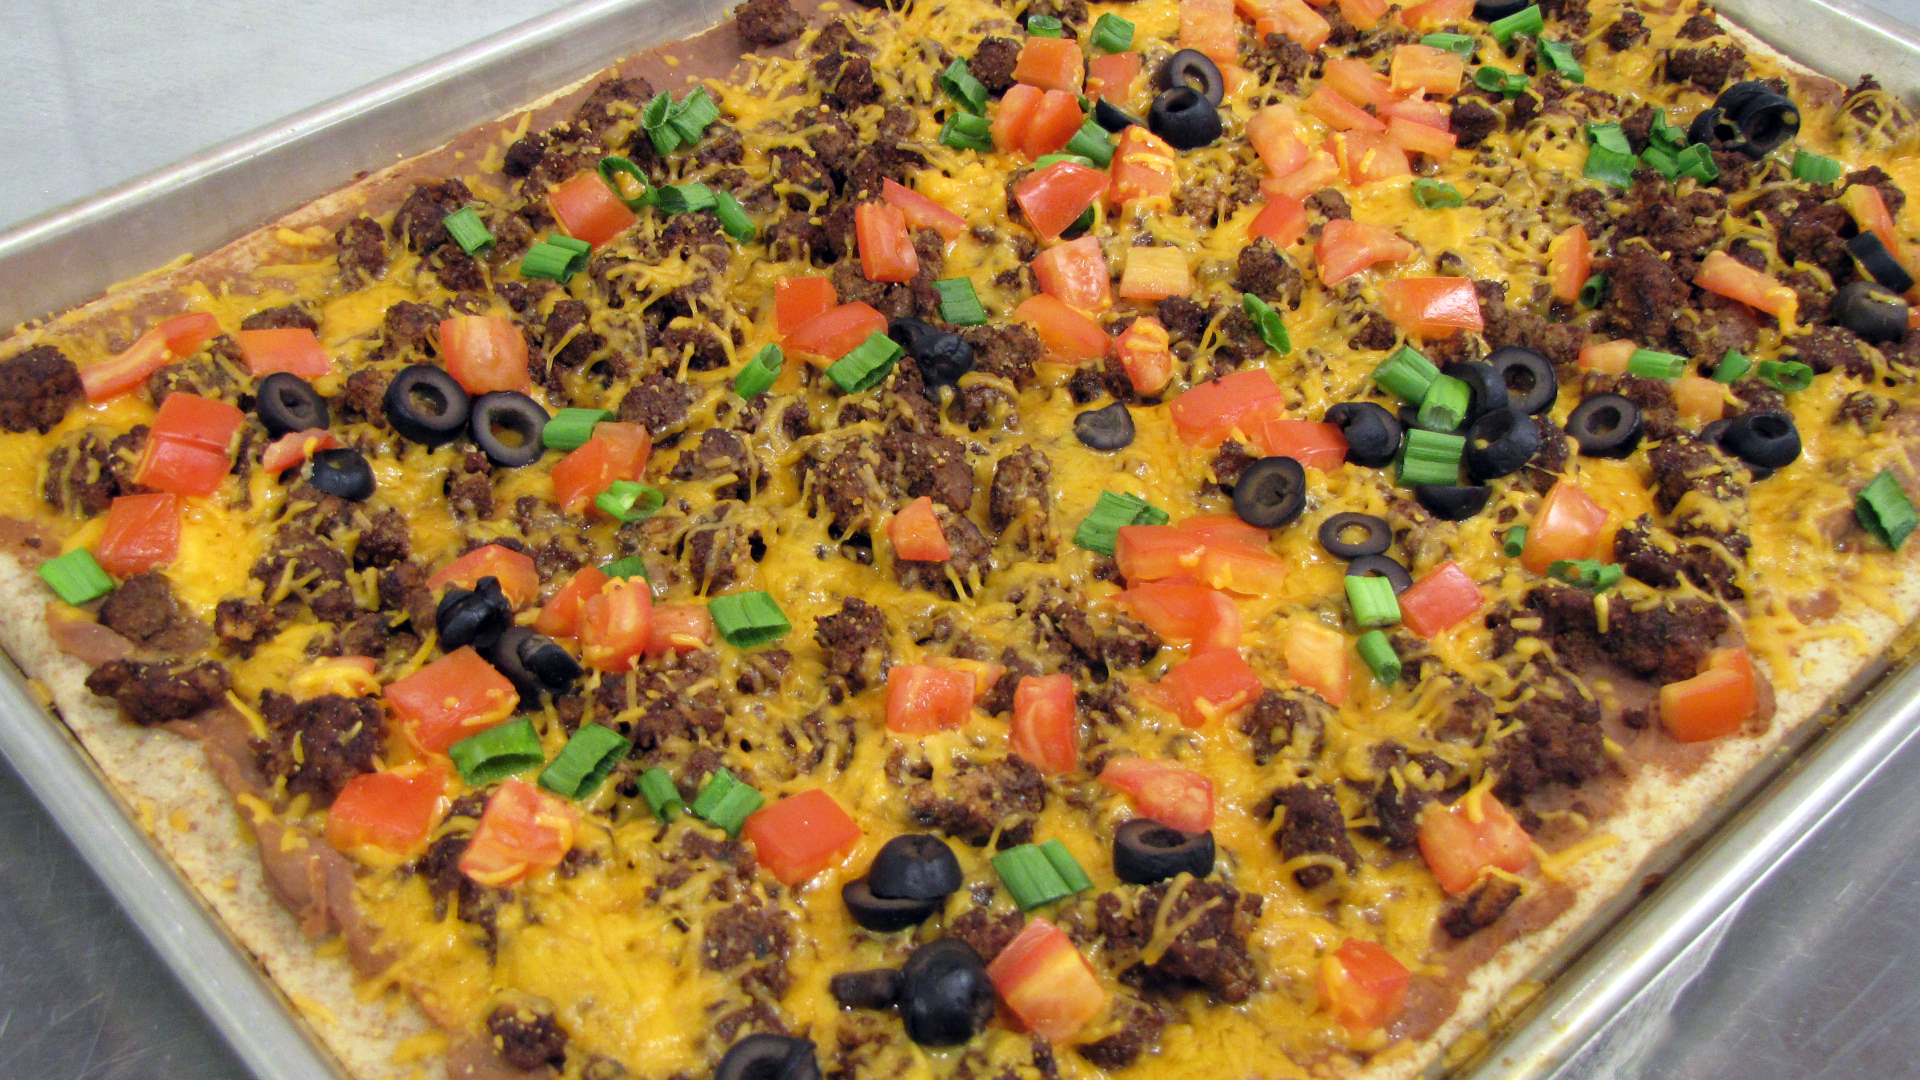 This easy taco pizza recipe can be topped with produce from your garden later this season. (NDSU Photo)